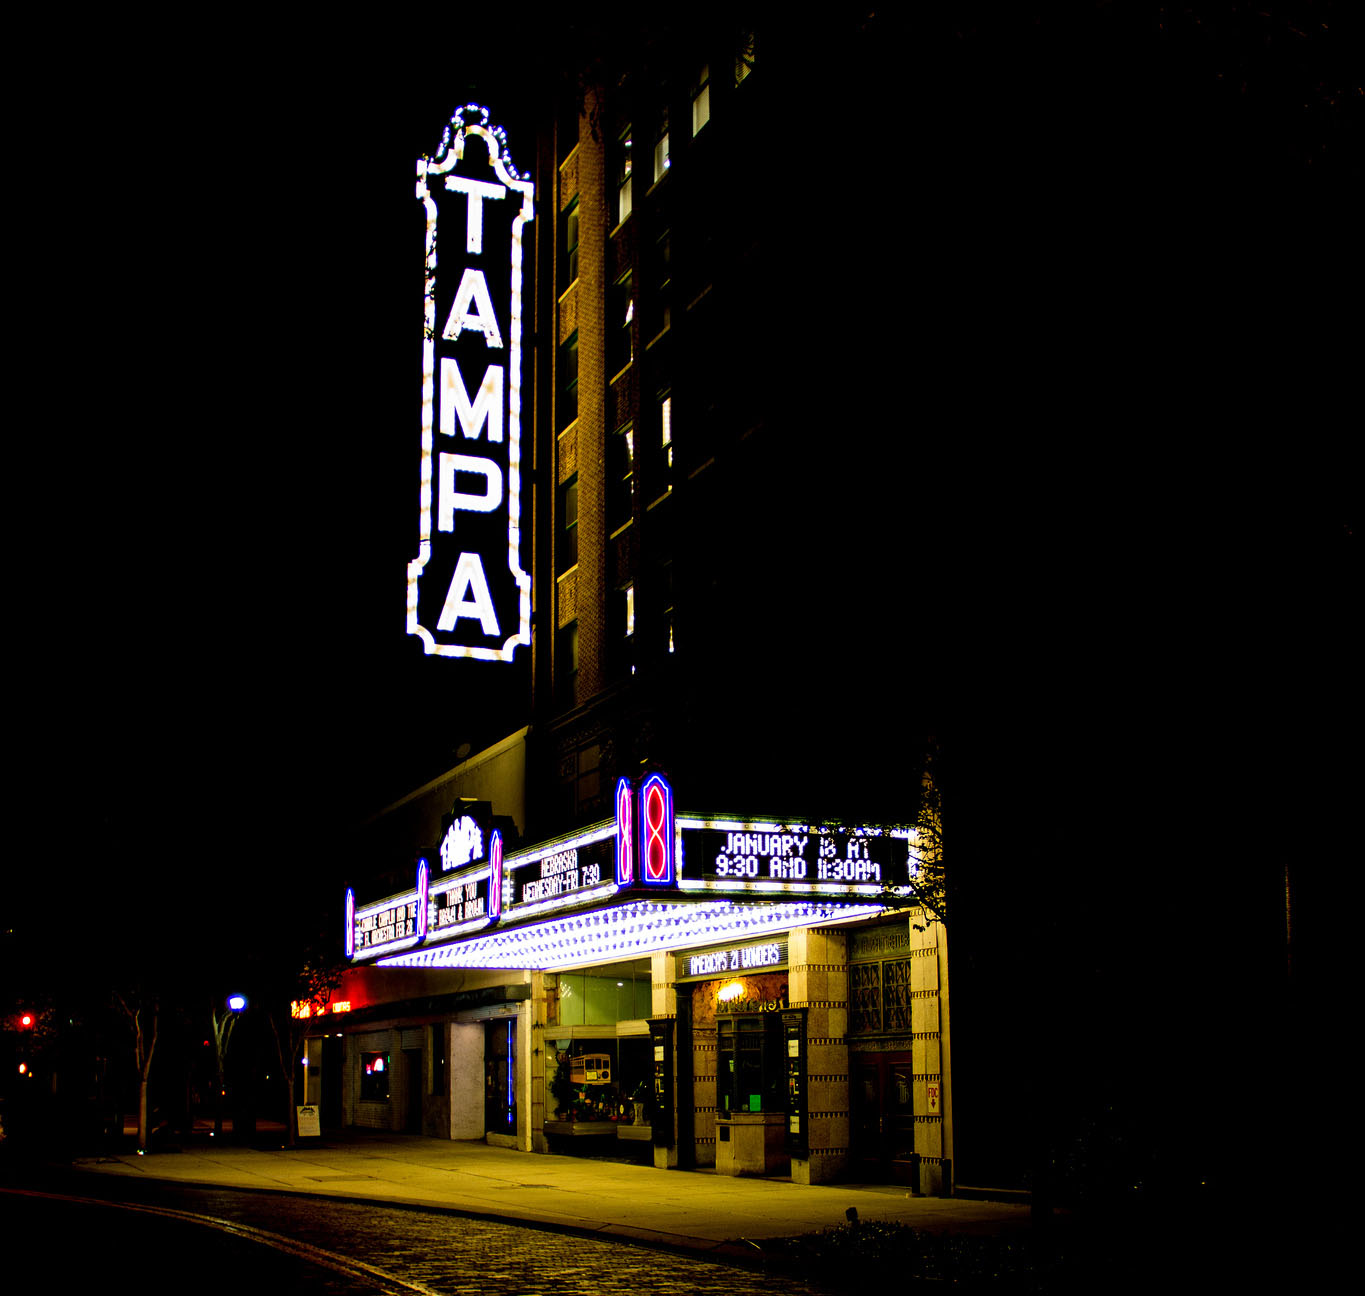 A photograph of the Tampa theater in beautiful downtown Tampa, Fl by Sam Hamberg.